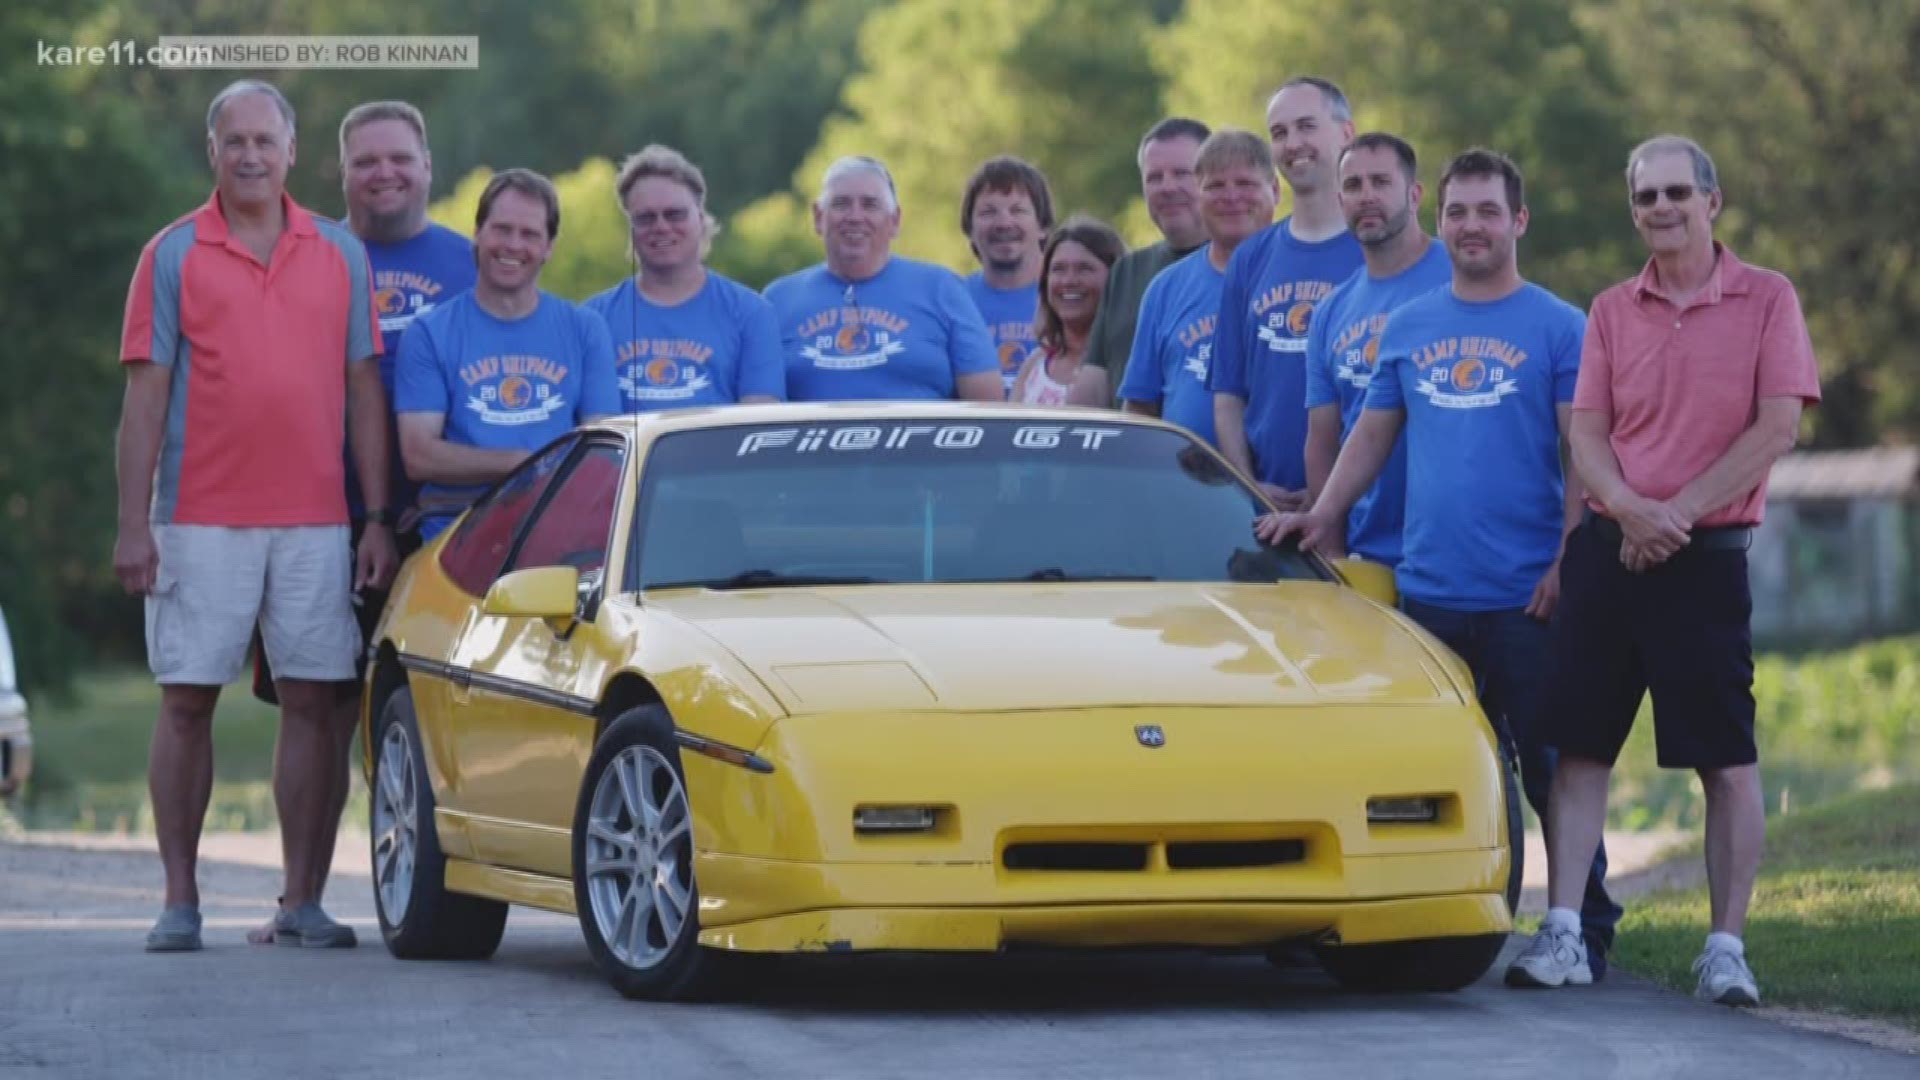 A special anniversary was marked this weekend in a small western Minnesota town. Frazee hosted its 10th Tyler Shipman Memorial Car Show. The show honors a teenager who died of cancer in 2009 and a group that gathered from around the country to make Tyler’s dying wish come true. https://kare11.tv/2OppGbU